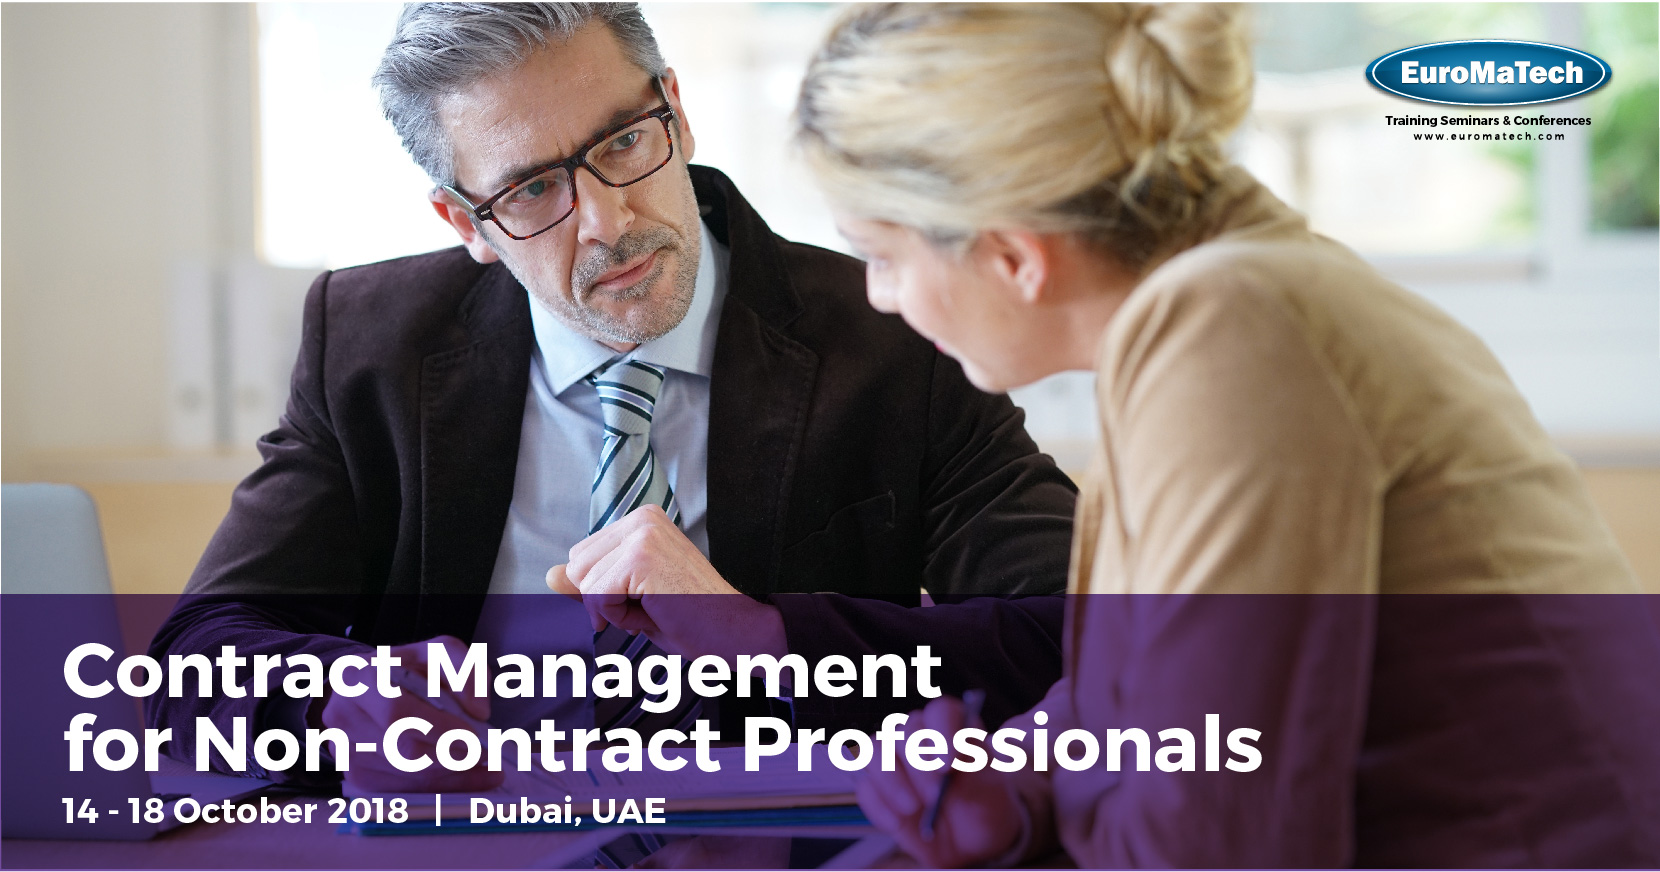 Contract Management for Non-Contract Professionals Training Course in Dubai